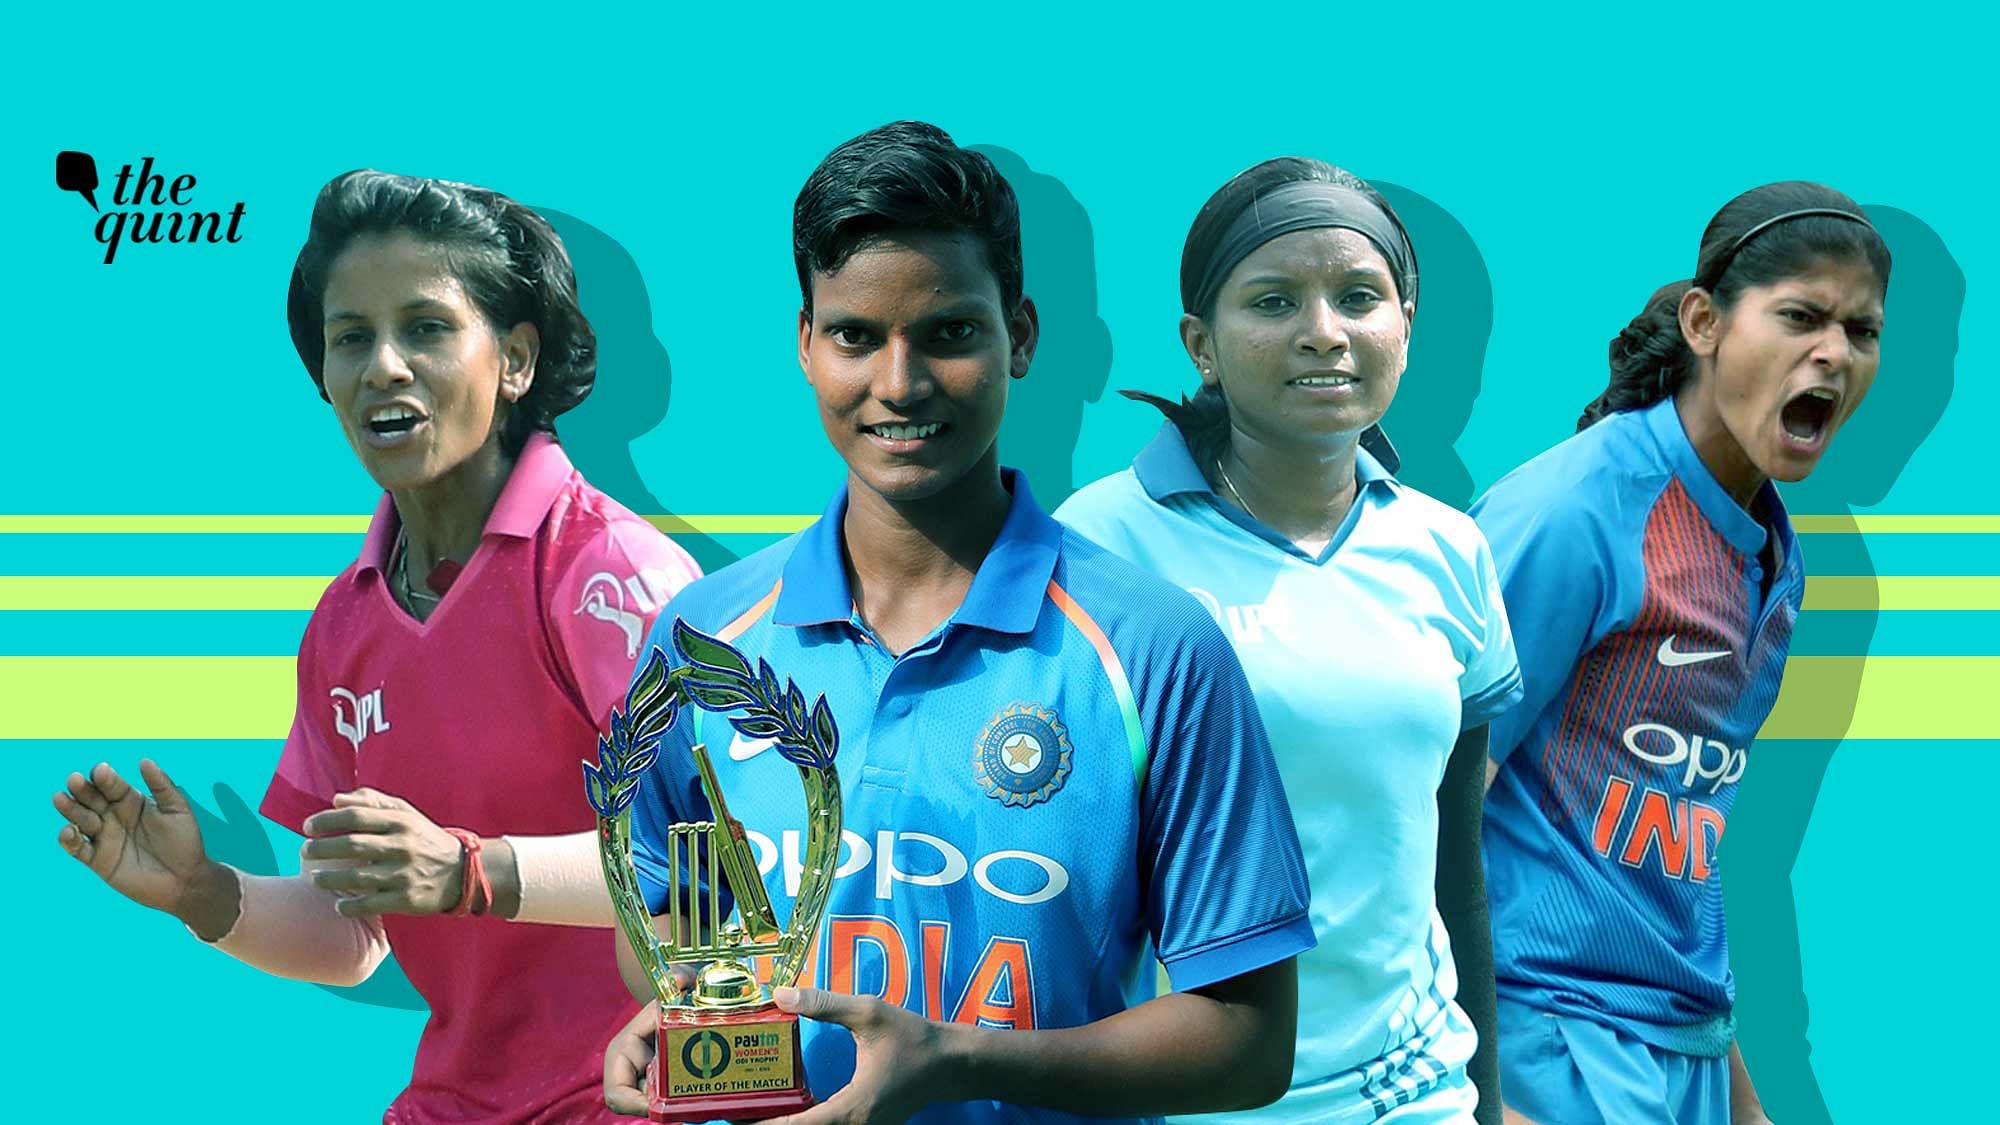 (From left to right) Poonam Yadav, Deepti Sharma, Rajeshwari Gayakwad and Radha Yadav are the four spinners India have in their T20 World Cup squad.